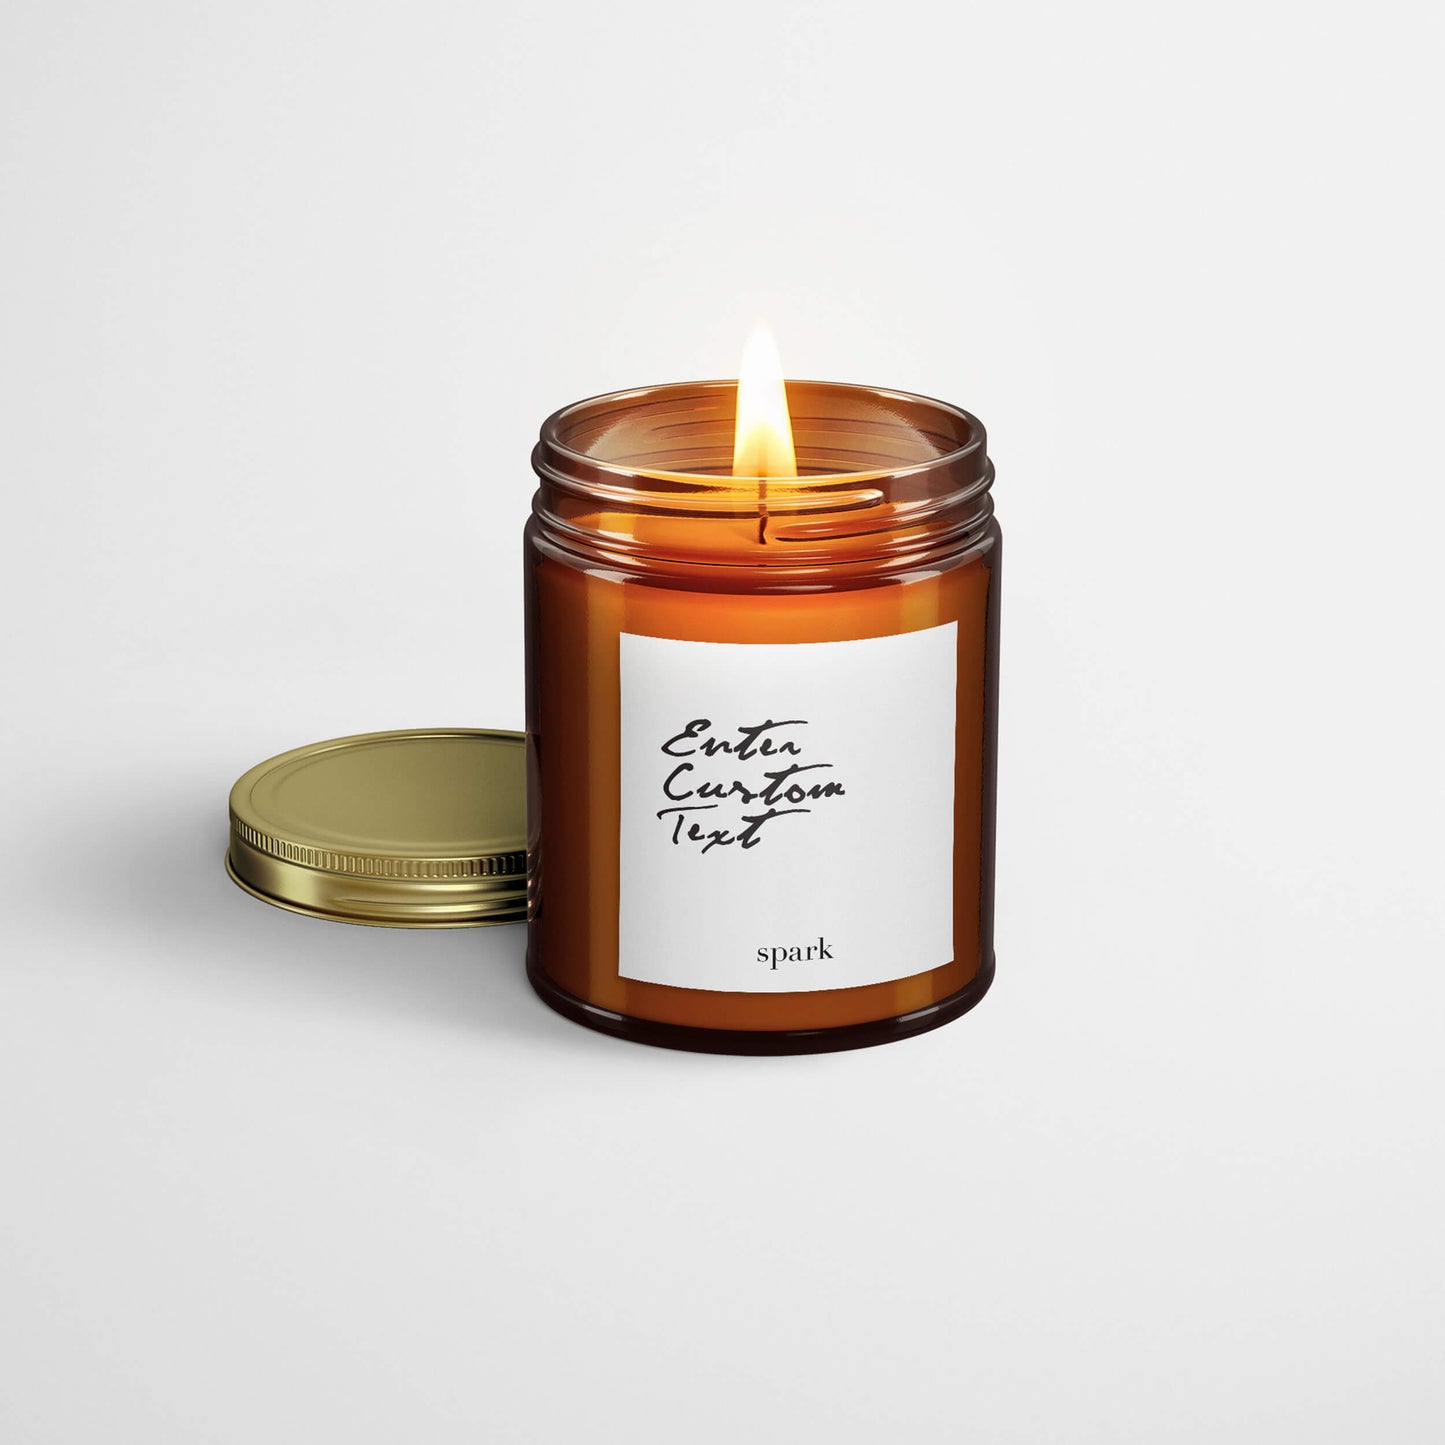 Buy Custom labels For Candle Jars